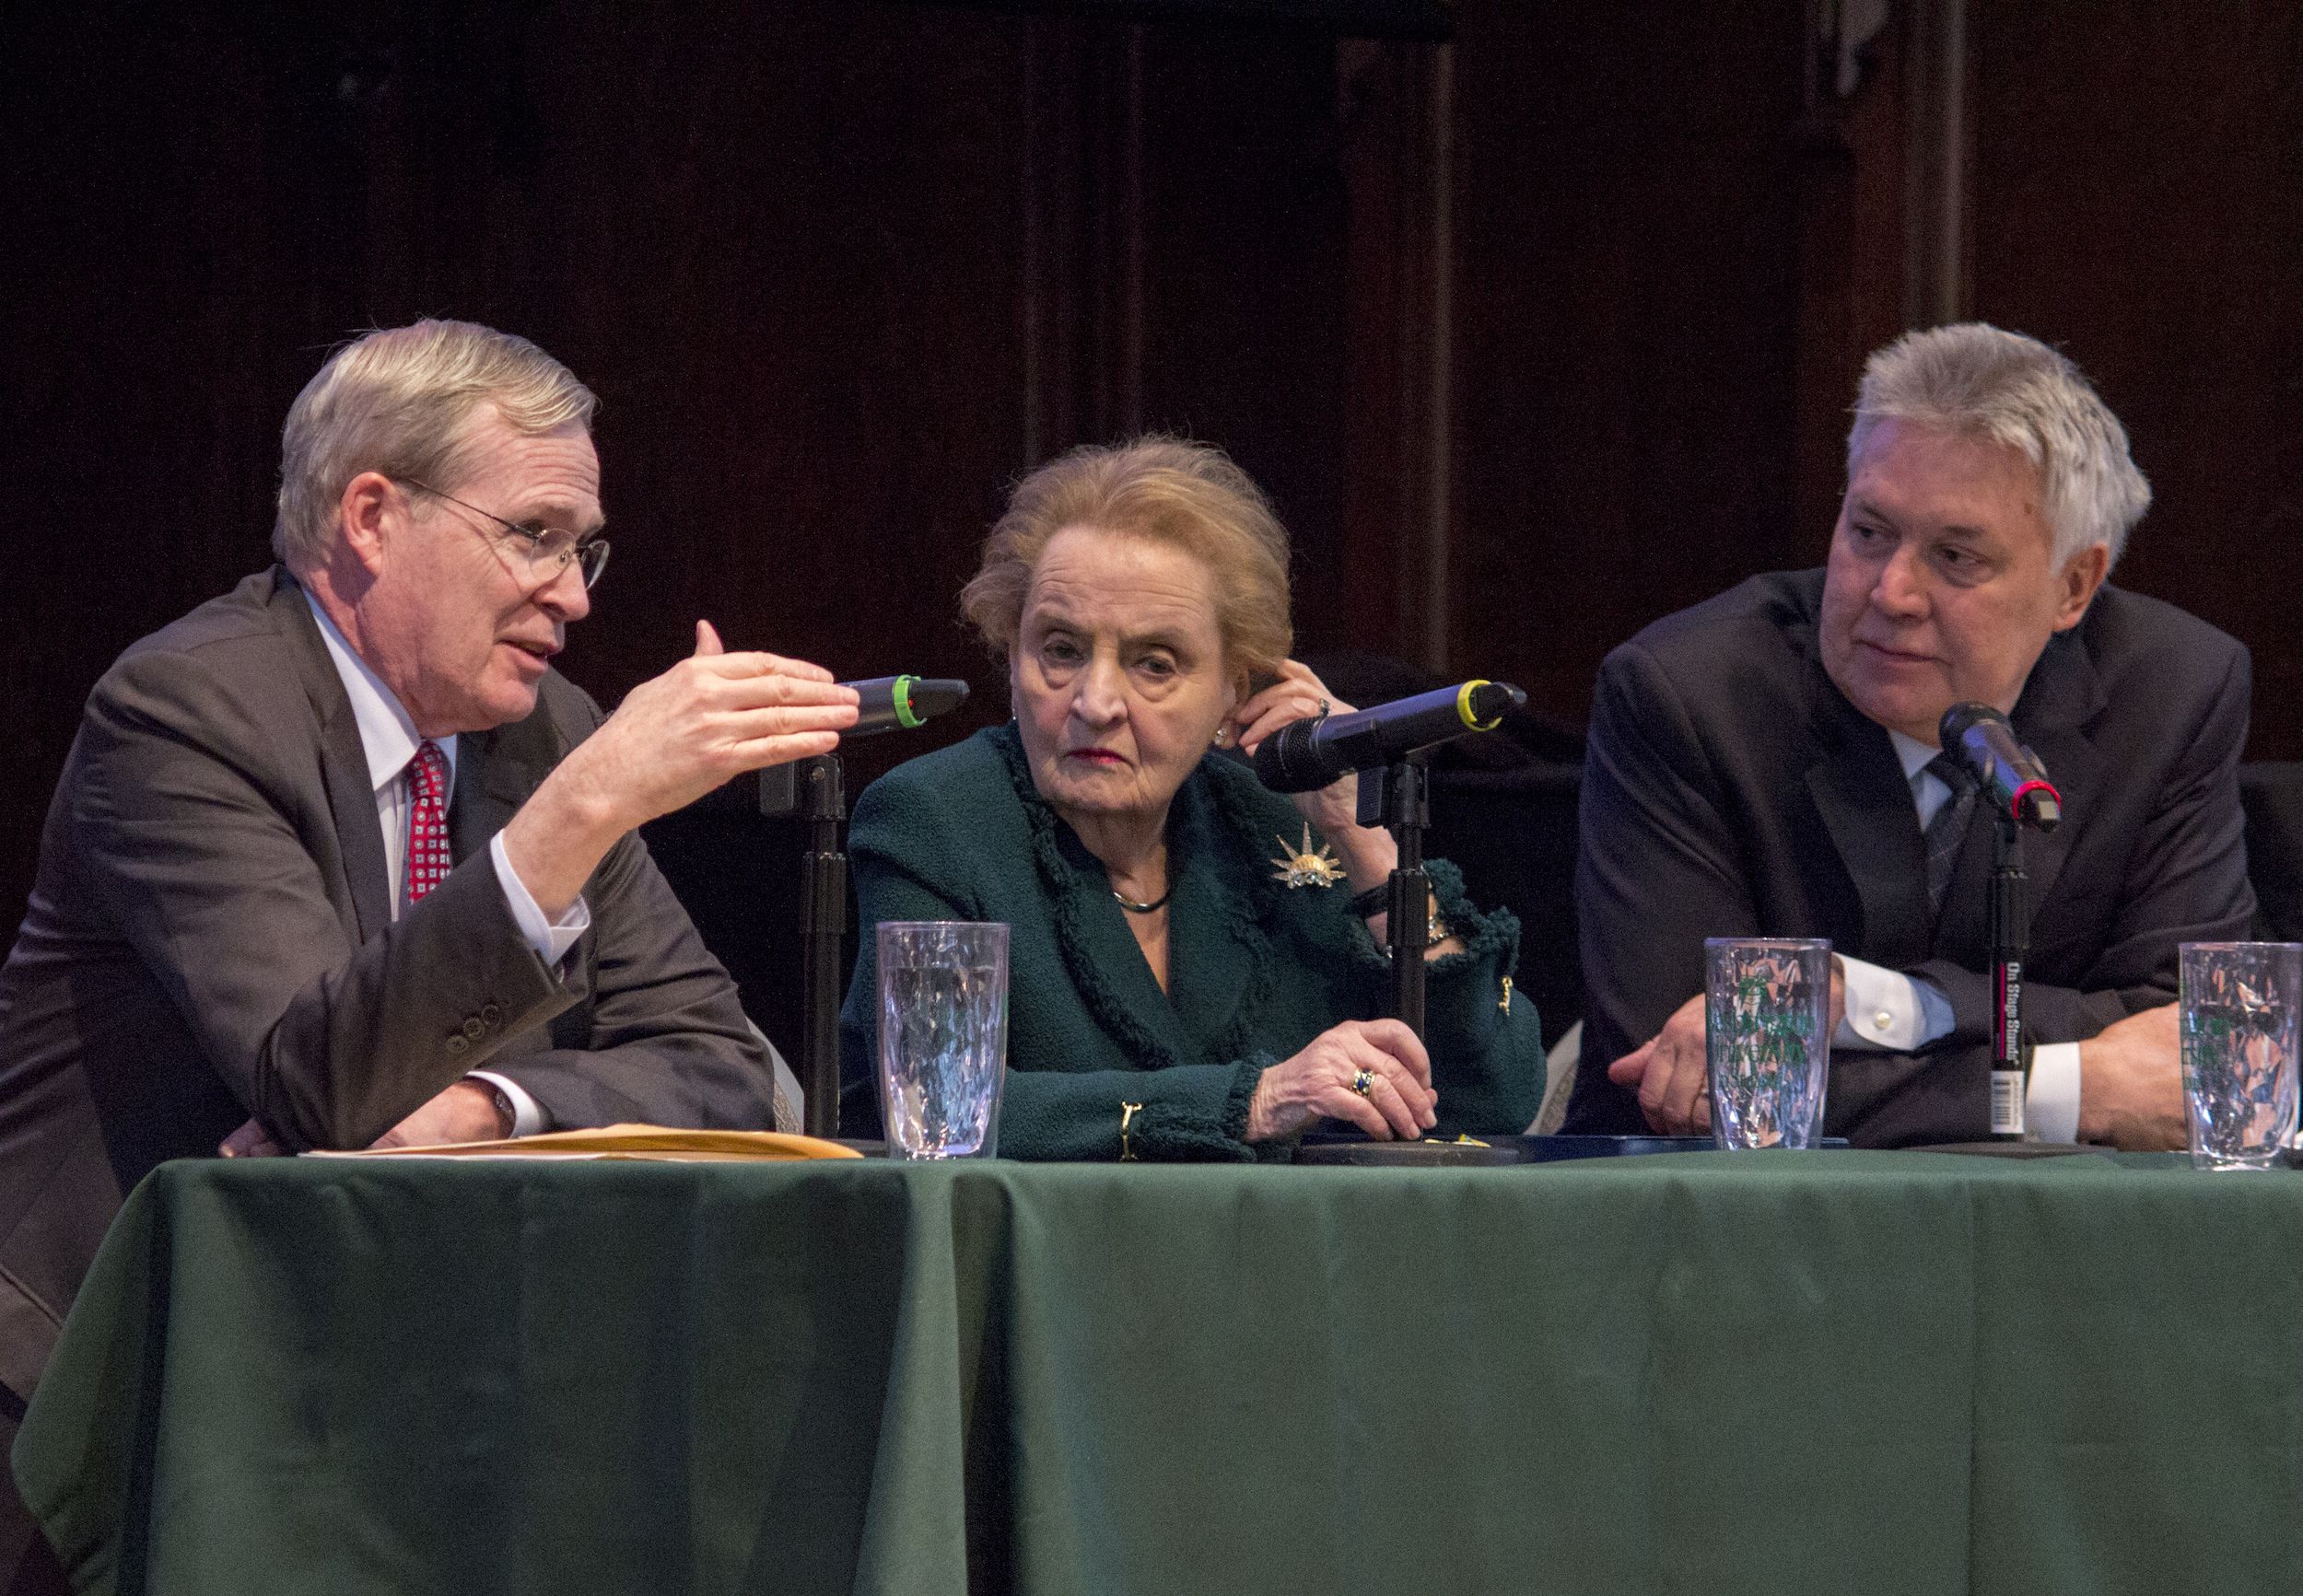 Jon Sawyer moderates a discussion between Madeleine Albright and Stephen Hadley surrounding the Middle East Strategy at Washington University in St. Louis. Image by Lauren Shepherd, United States, 2017.